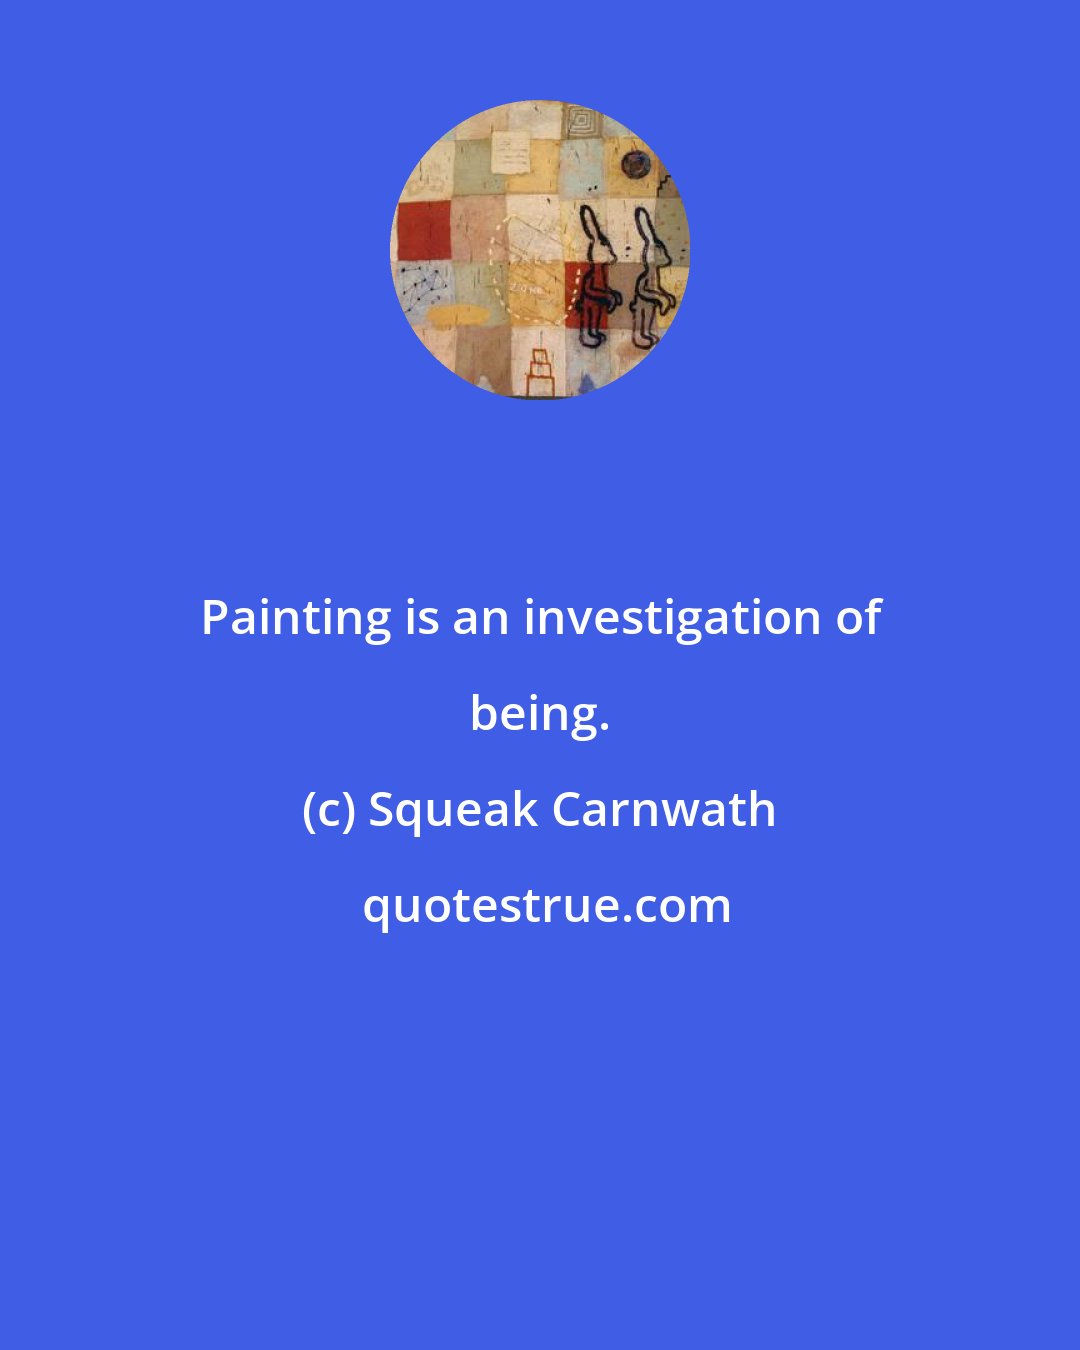 Squeak Carnwath: Painting is an investigation of being.